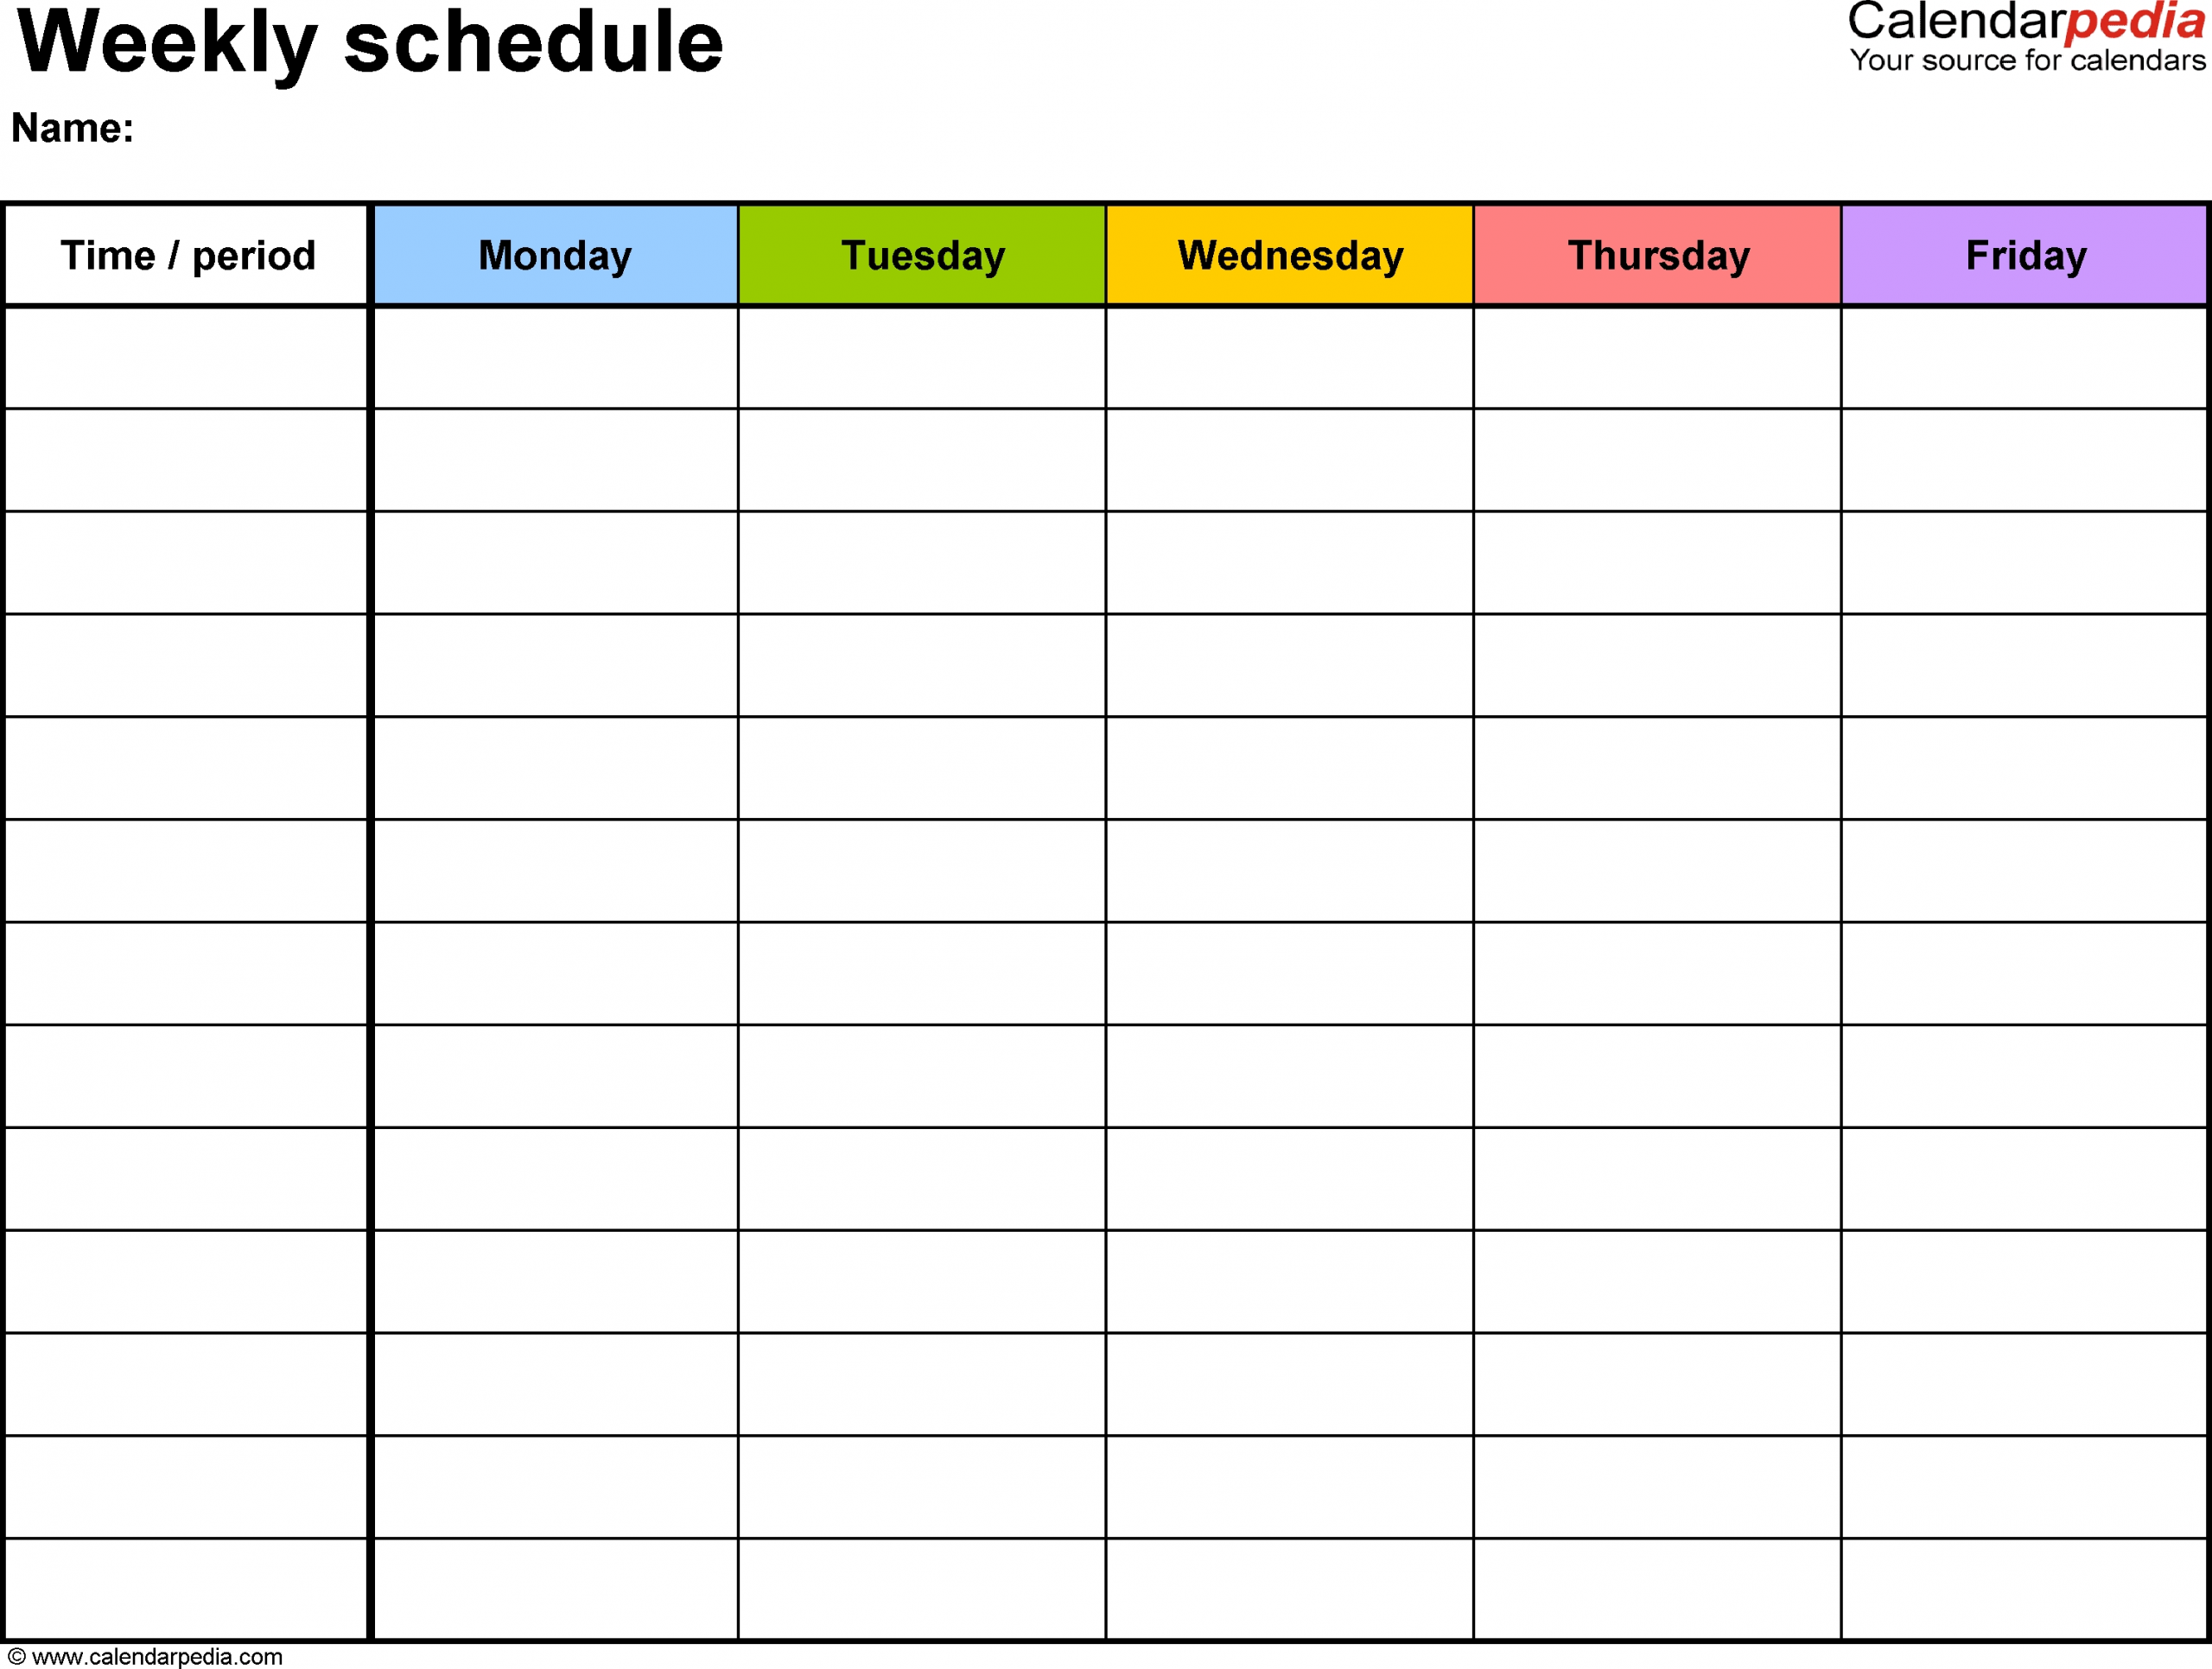 Free Weekly Schedule Templates For Excel - 18 Templates intended for Printable Weekly Schedule Flow Chart